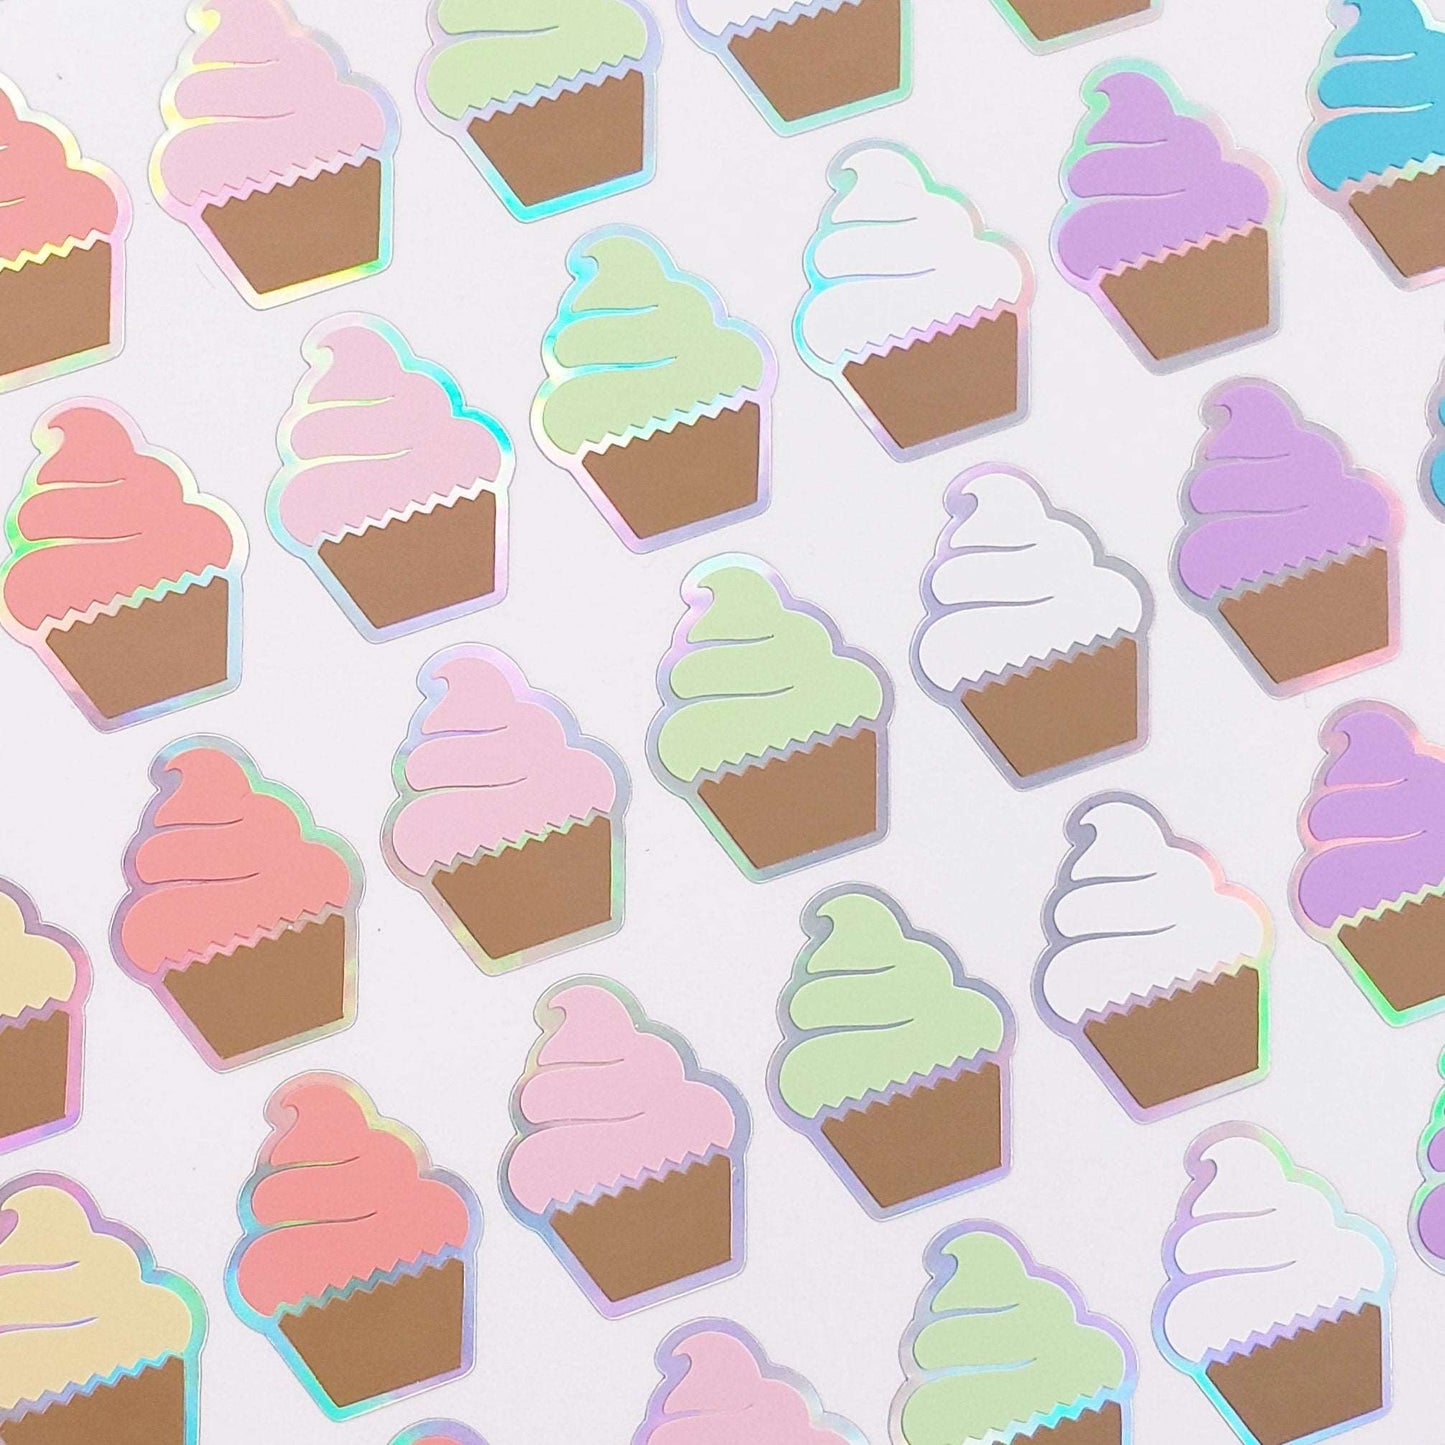 Cupcakes Stickers, set of 45 small birthday party cake decals for favors, invitations, envelopes and scrapbooks, pastel rainbow colors